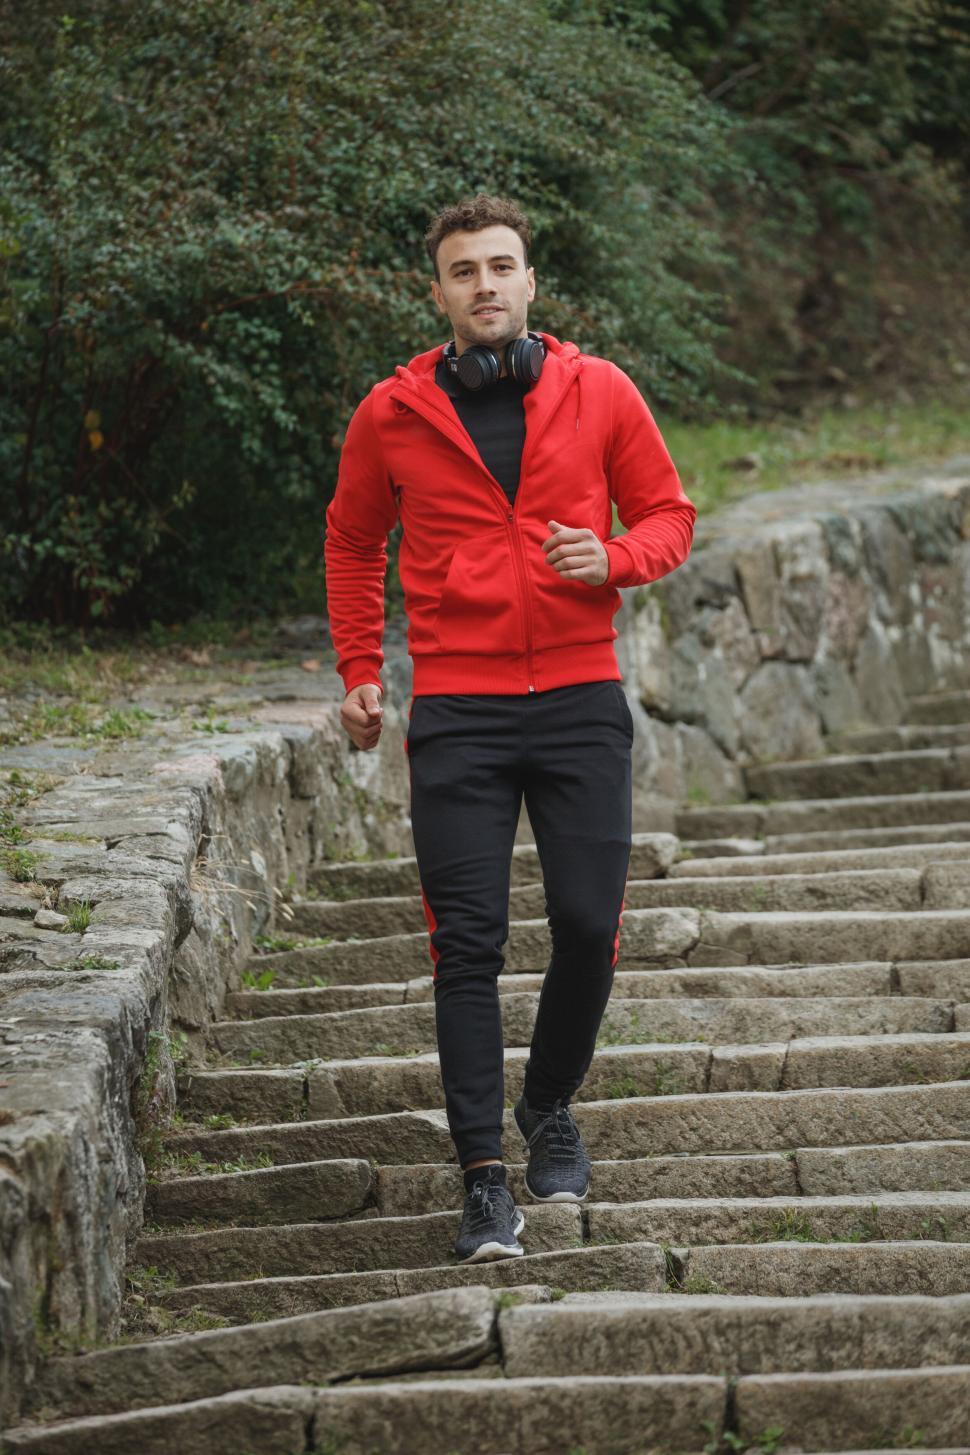 Free Image of Man jogging on stone steps outdoors 